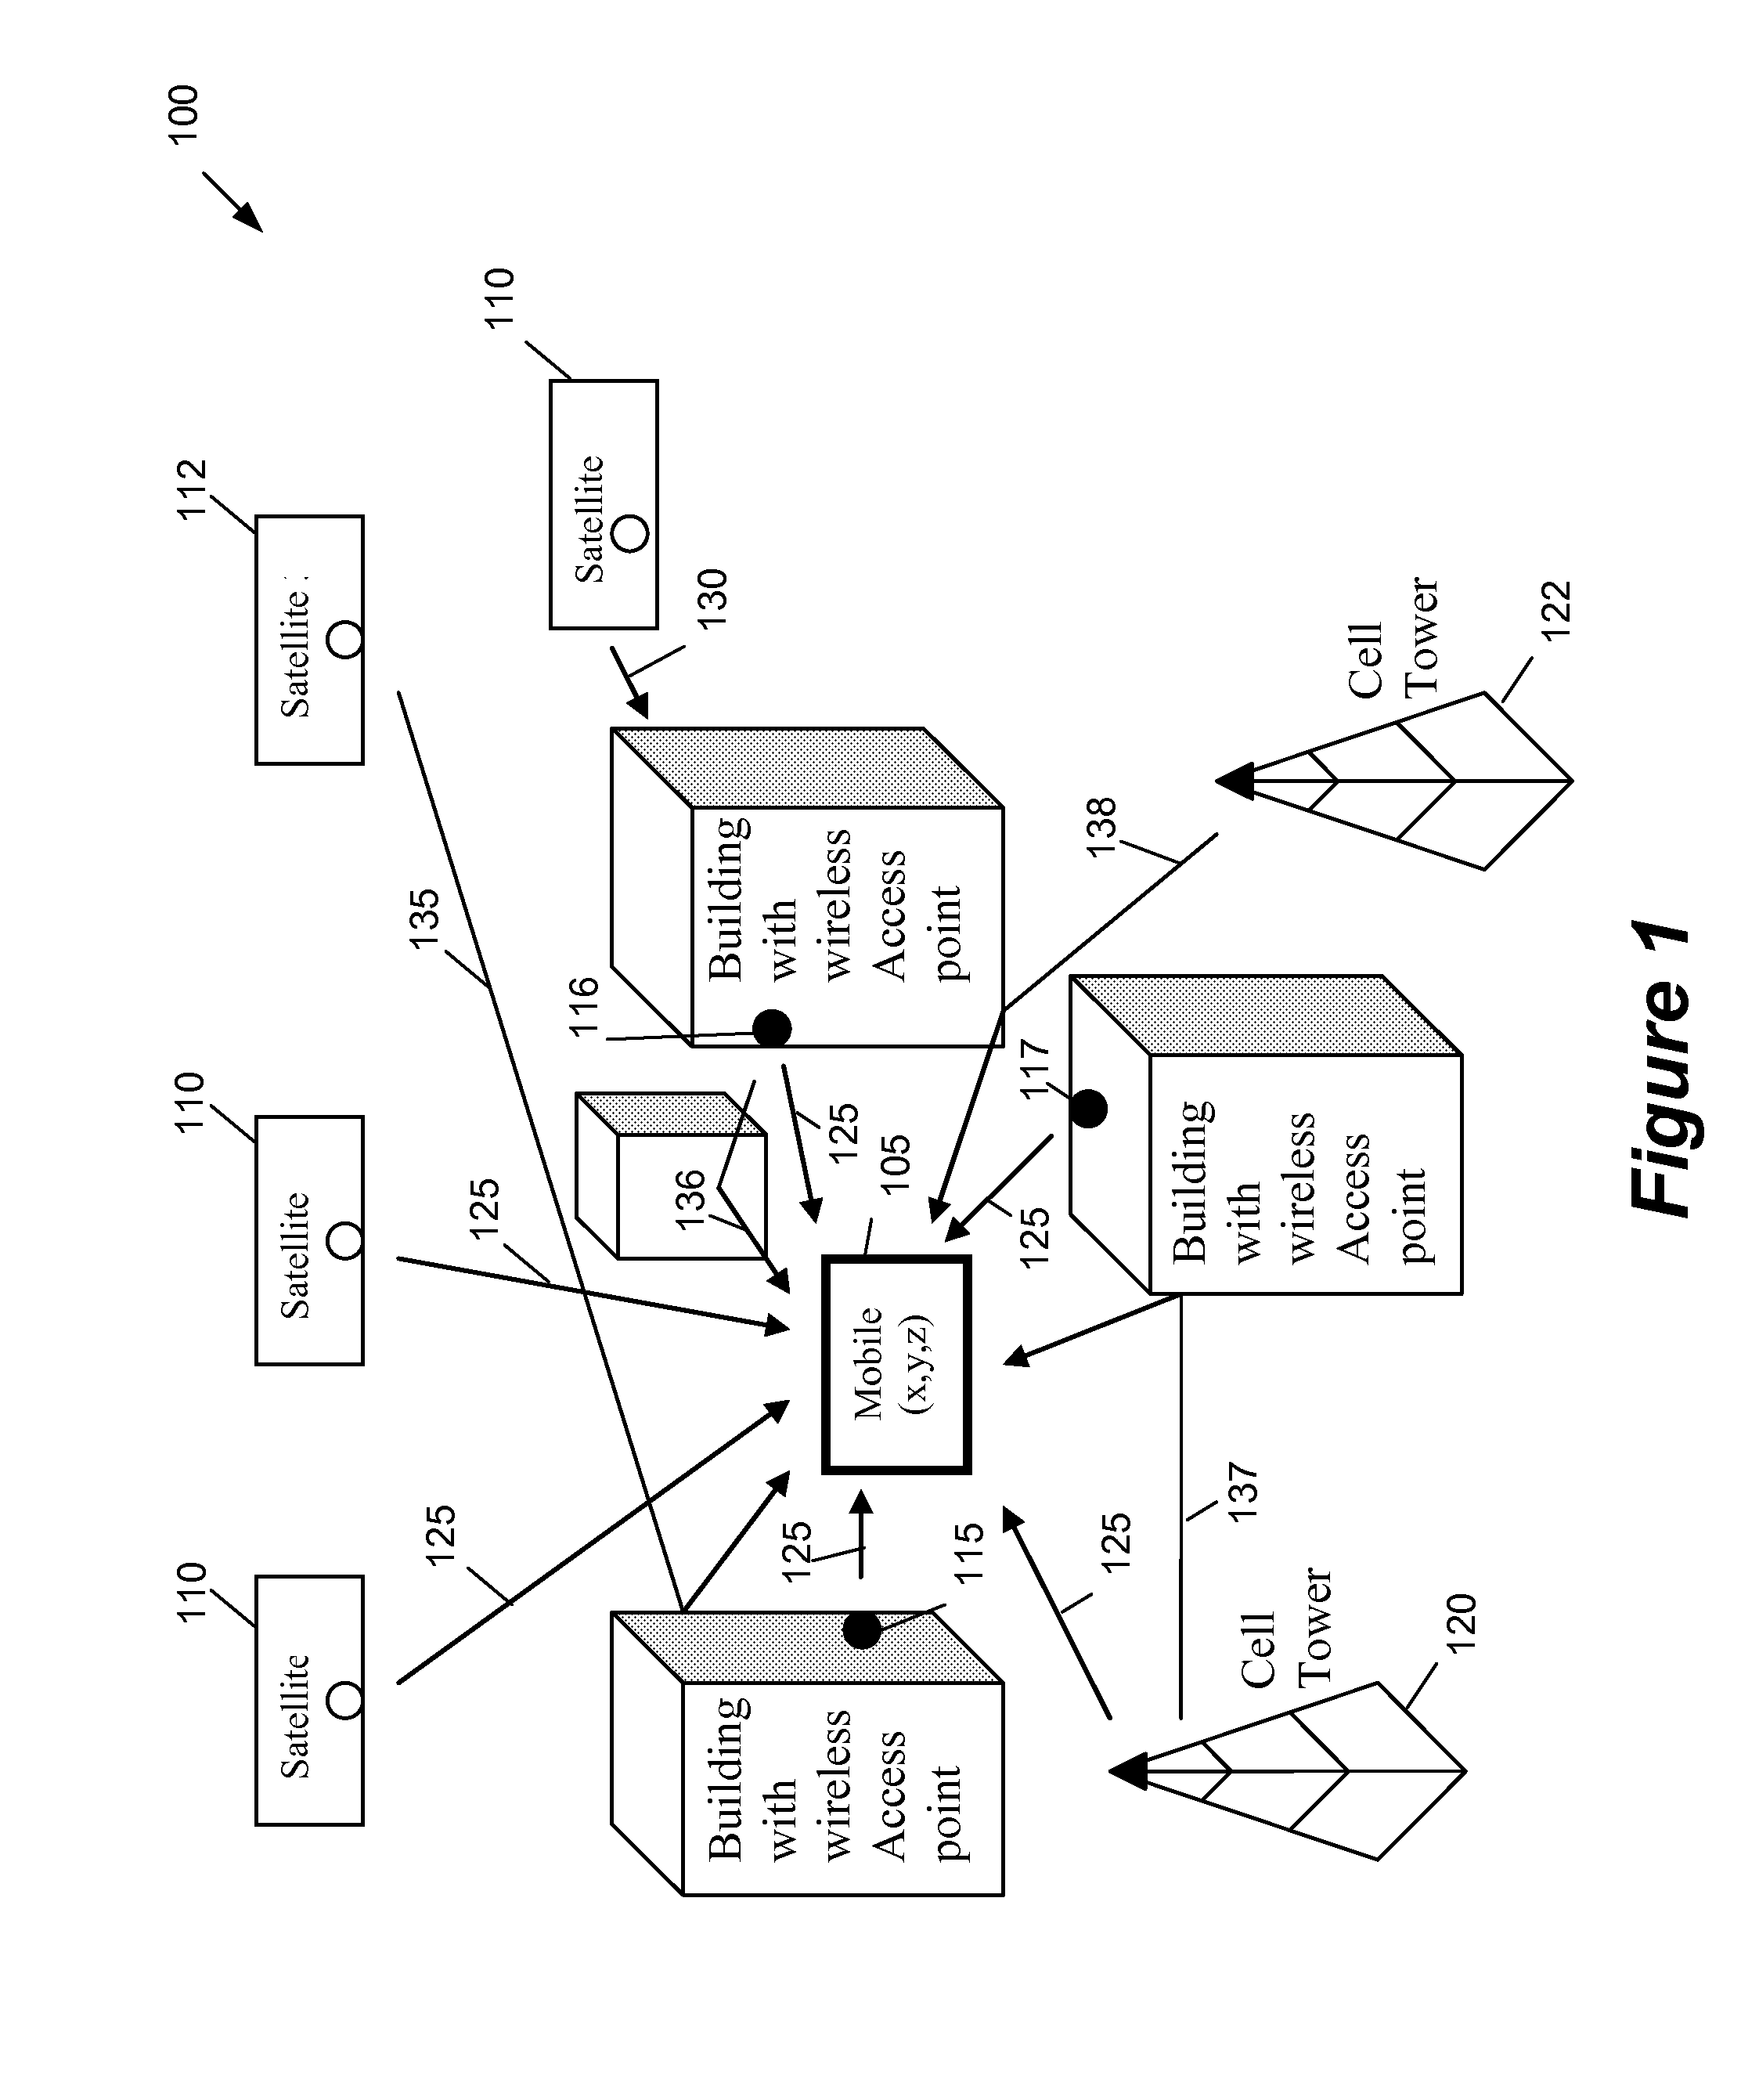 Method and system for determining the position of a mobile device